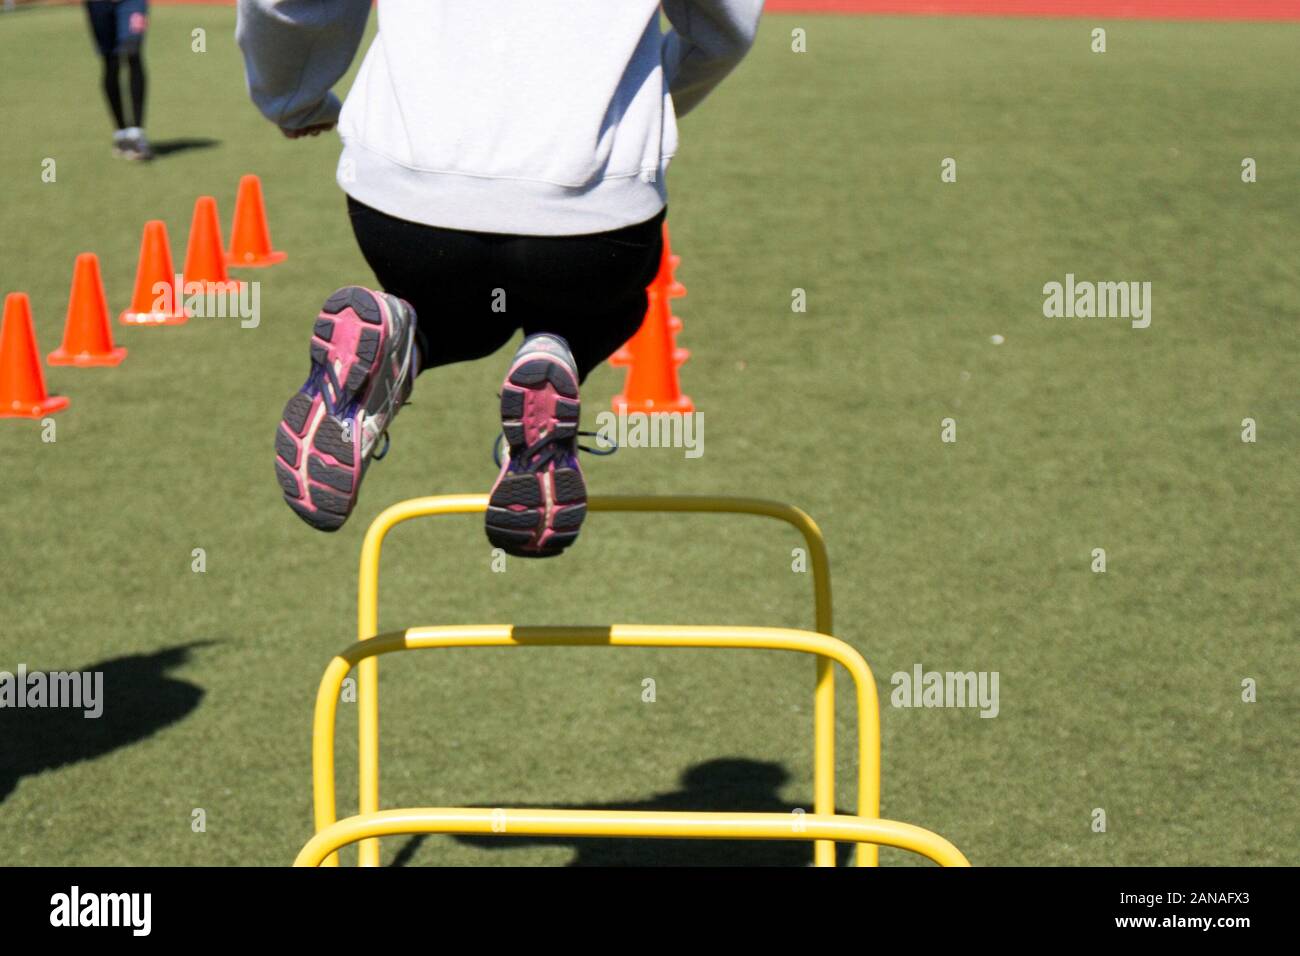 A track and field athlete jumps over a yellow hurdle while doing agility drills on a green turf Stock Photo